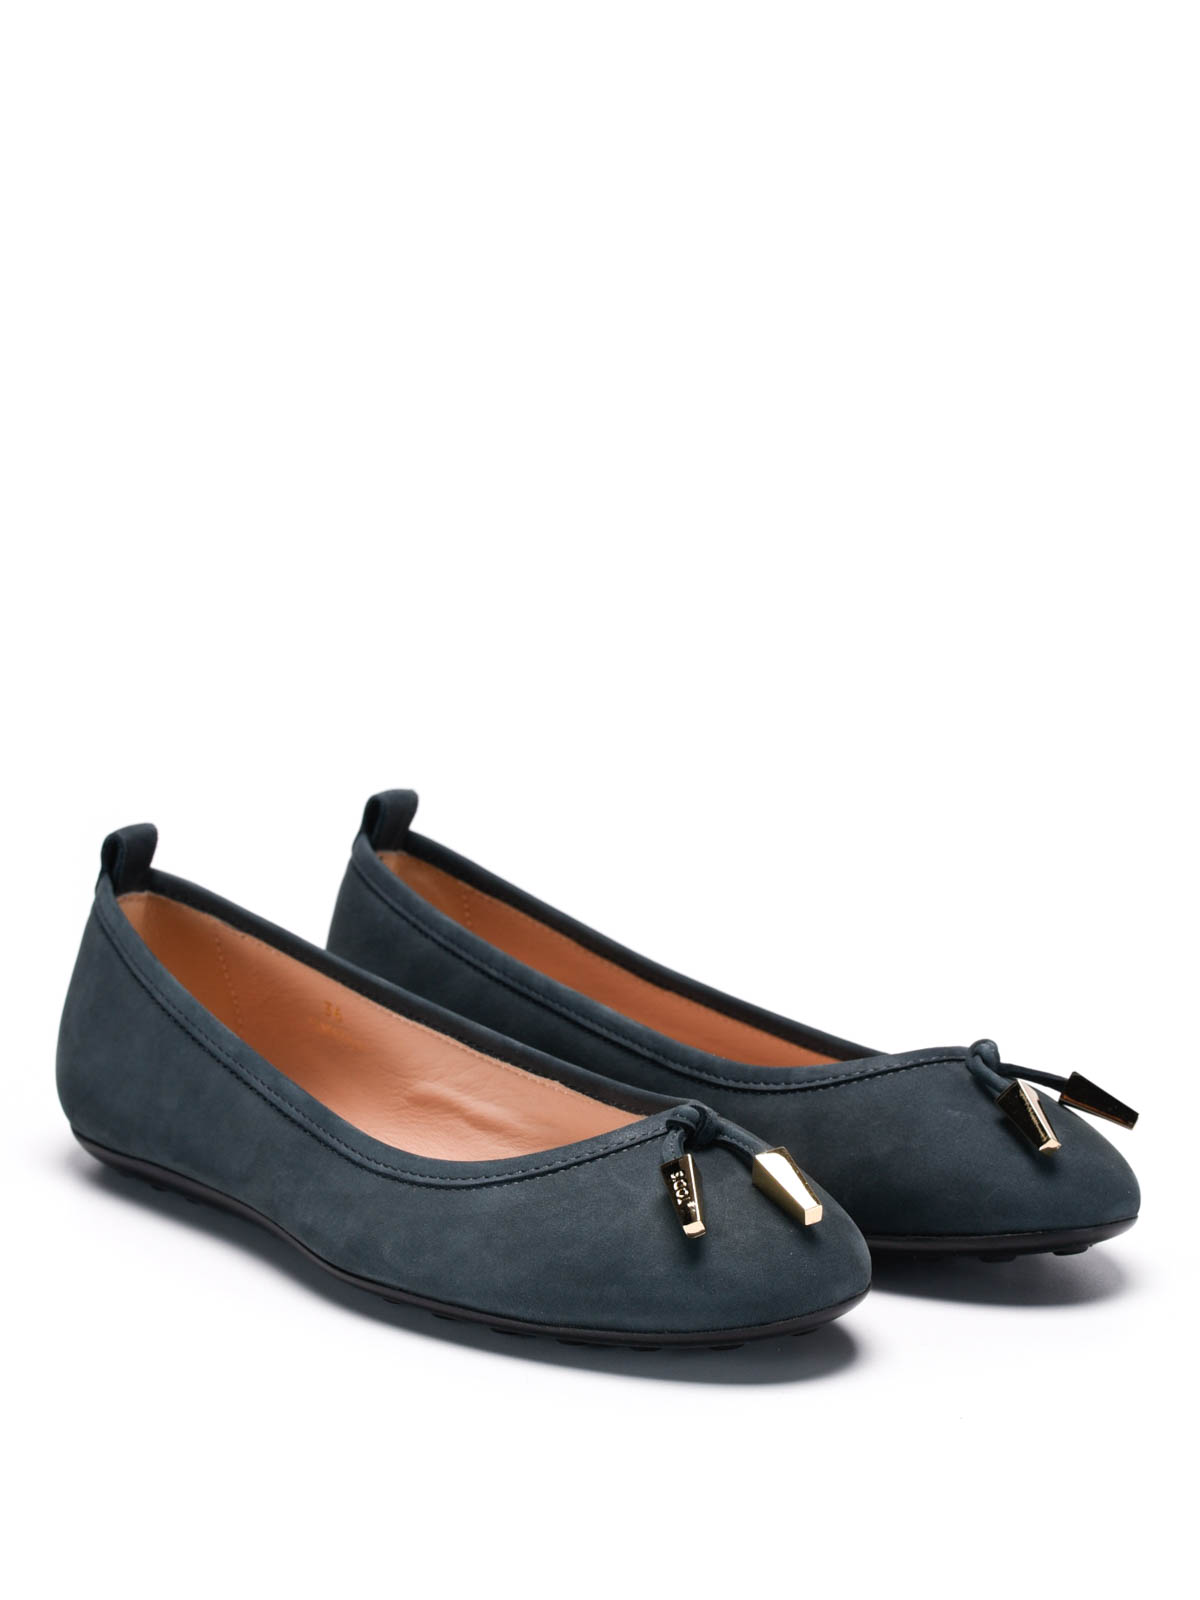 tods flat shoes